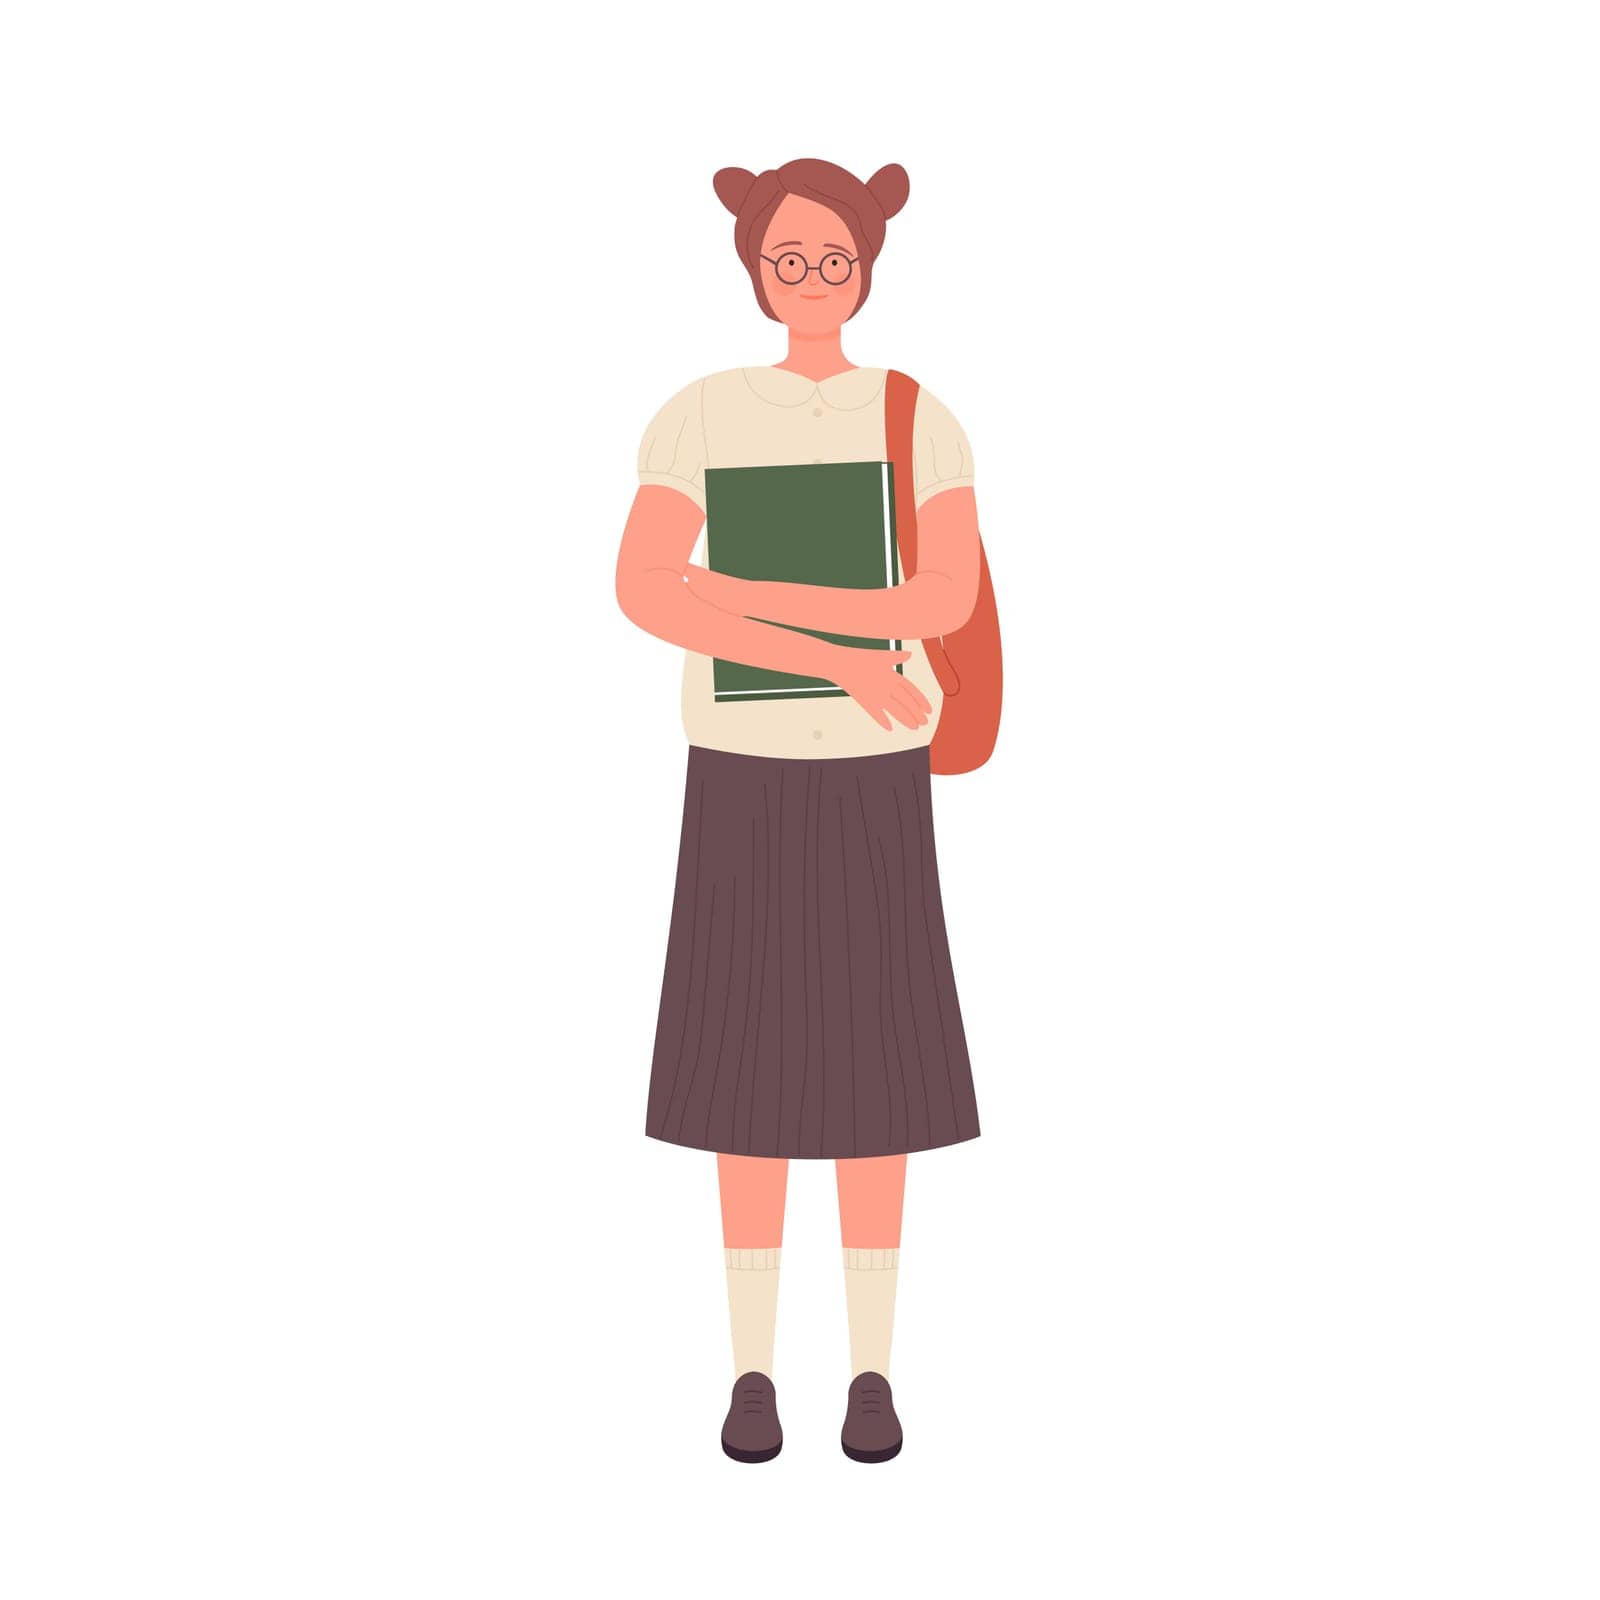 Nerd girl holding study material. Geek female student with school book vector illustration